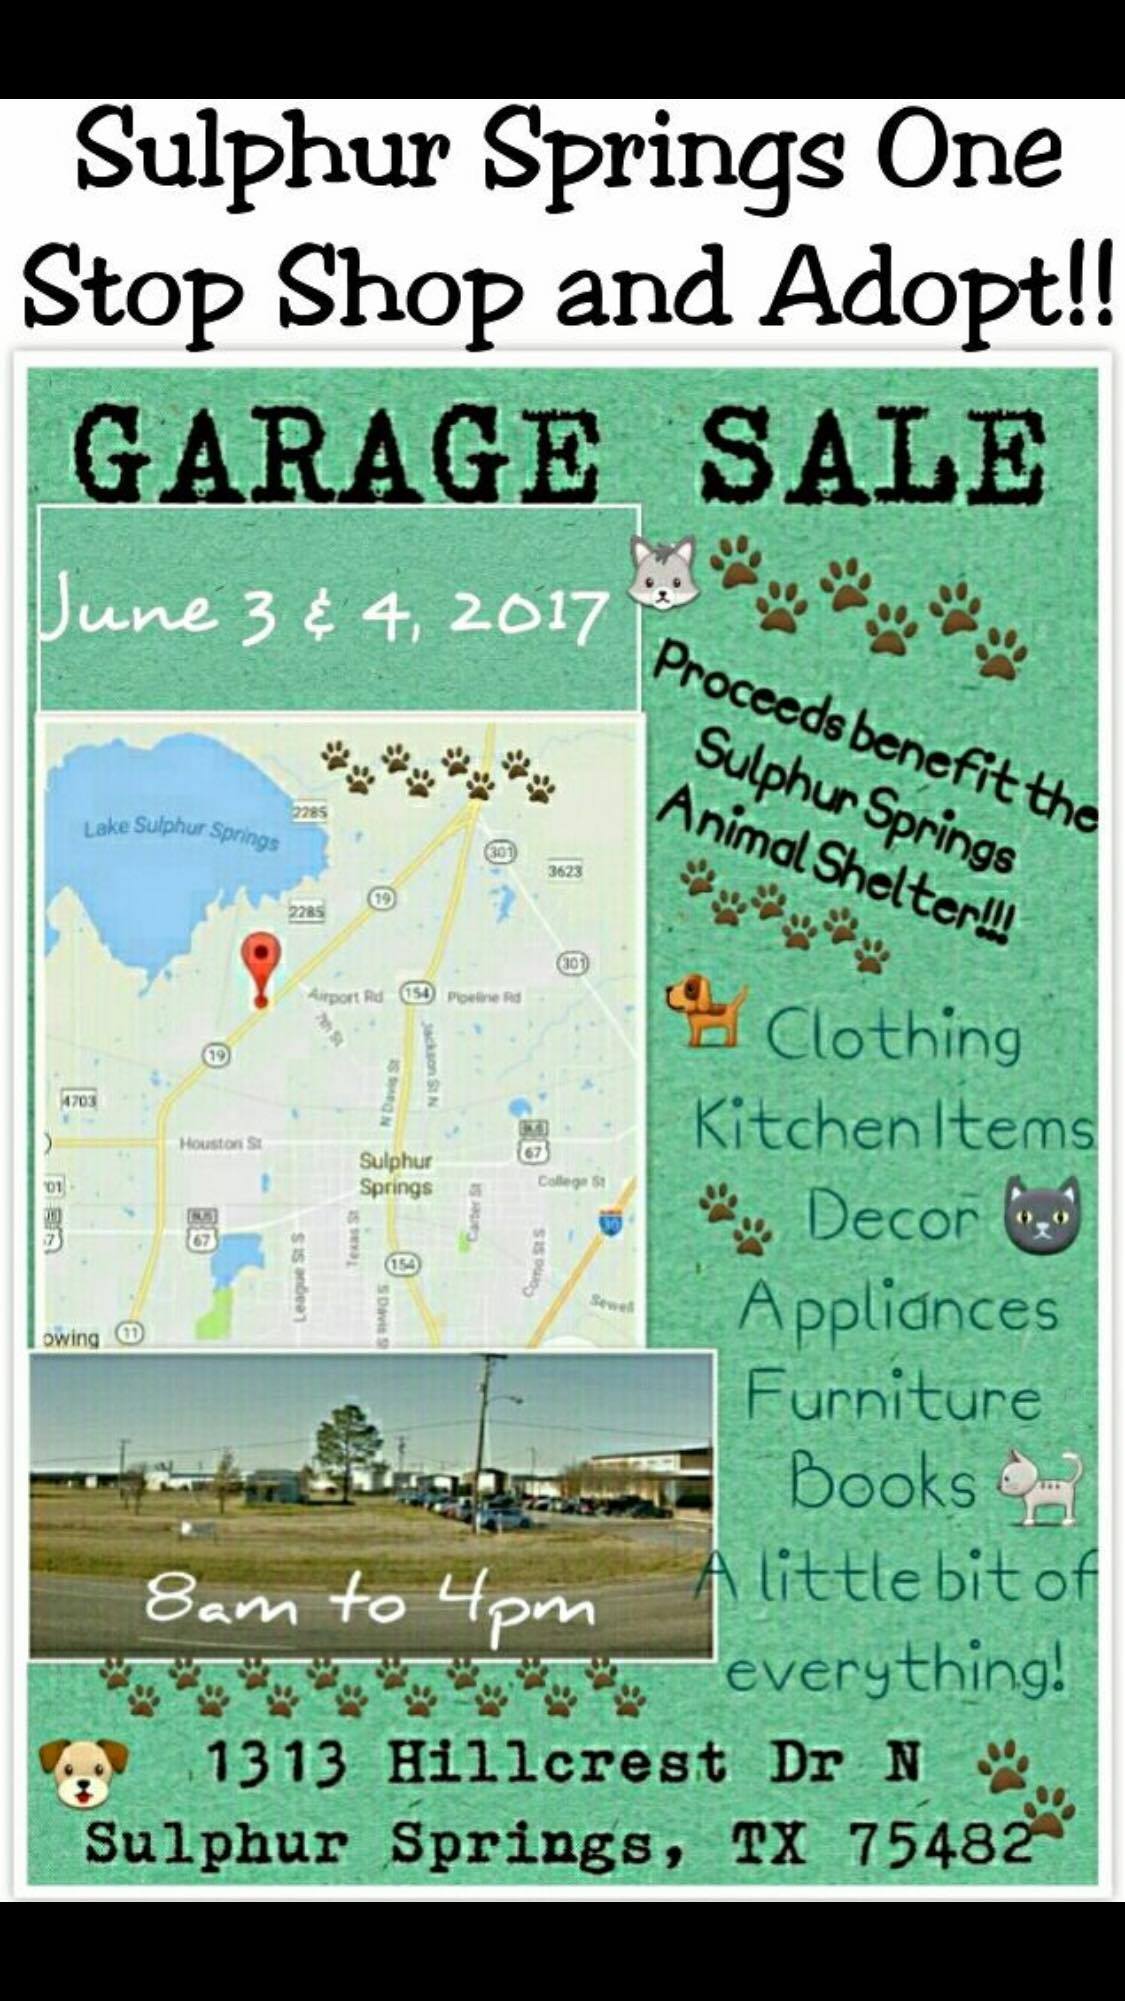 Sulphur Springs Animal Shelter Holding Garage Sale on June 3rd and 4th